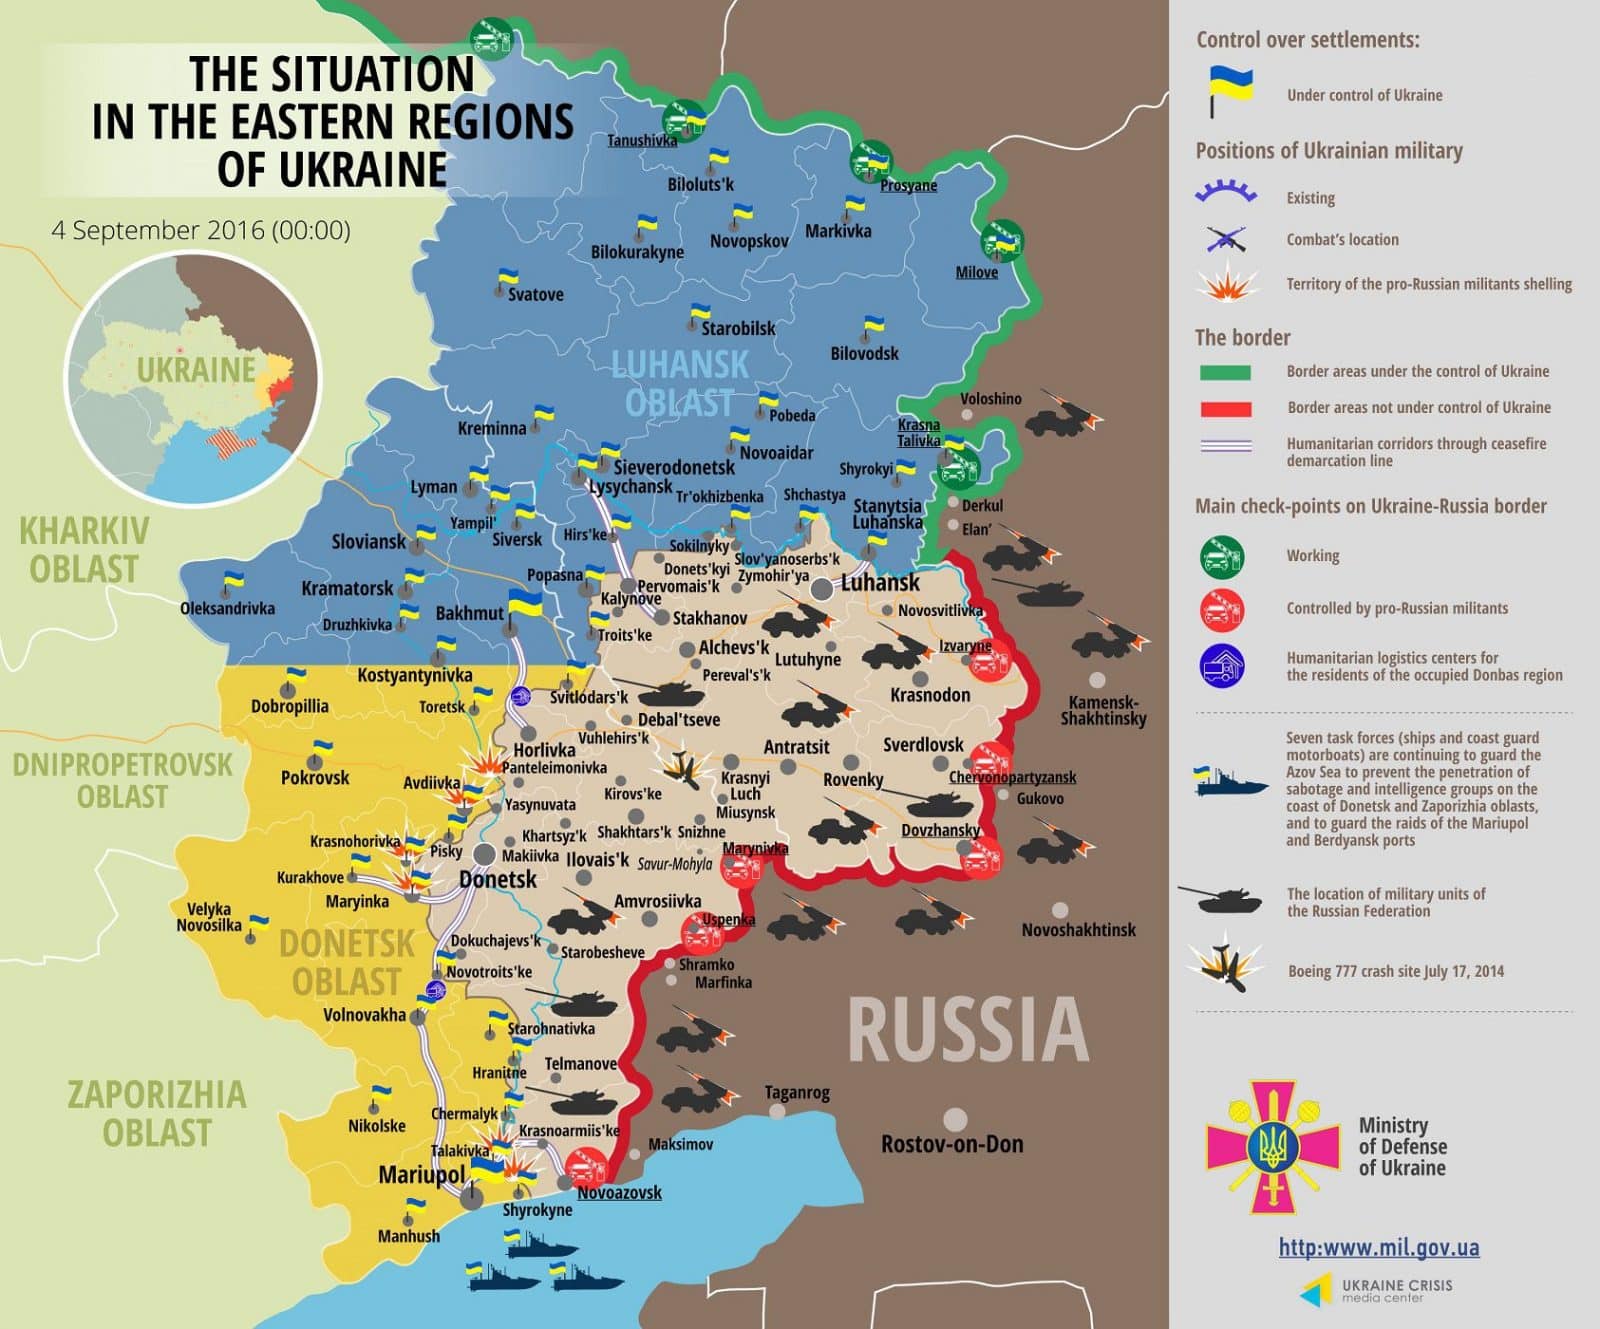 ”Ceasefire observed in Donbas”: Russian troops attack Ukraine 16 times in 24 hours